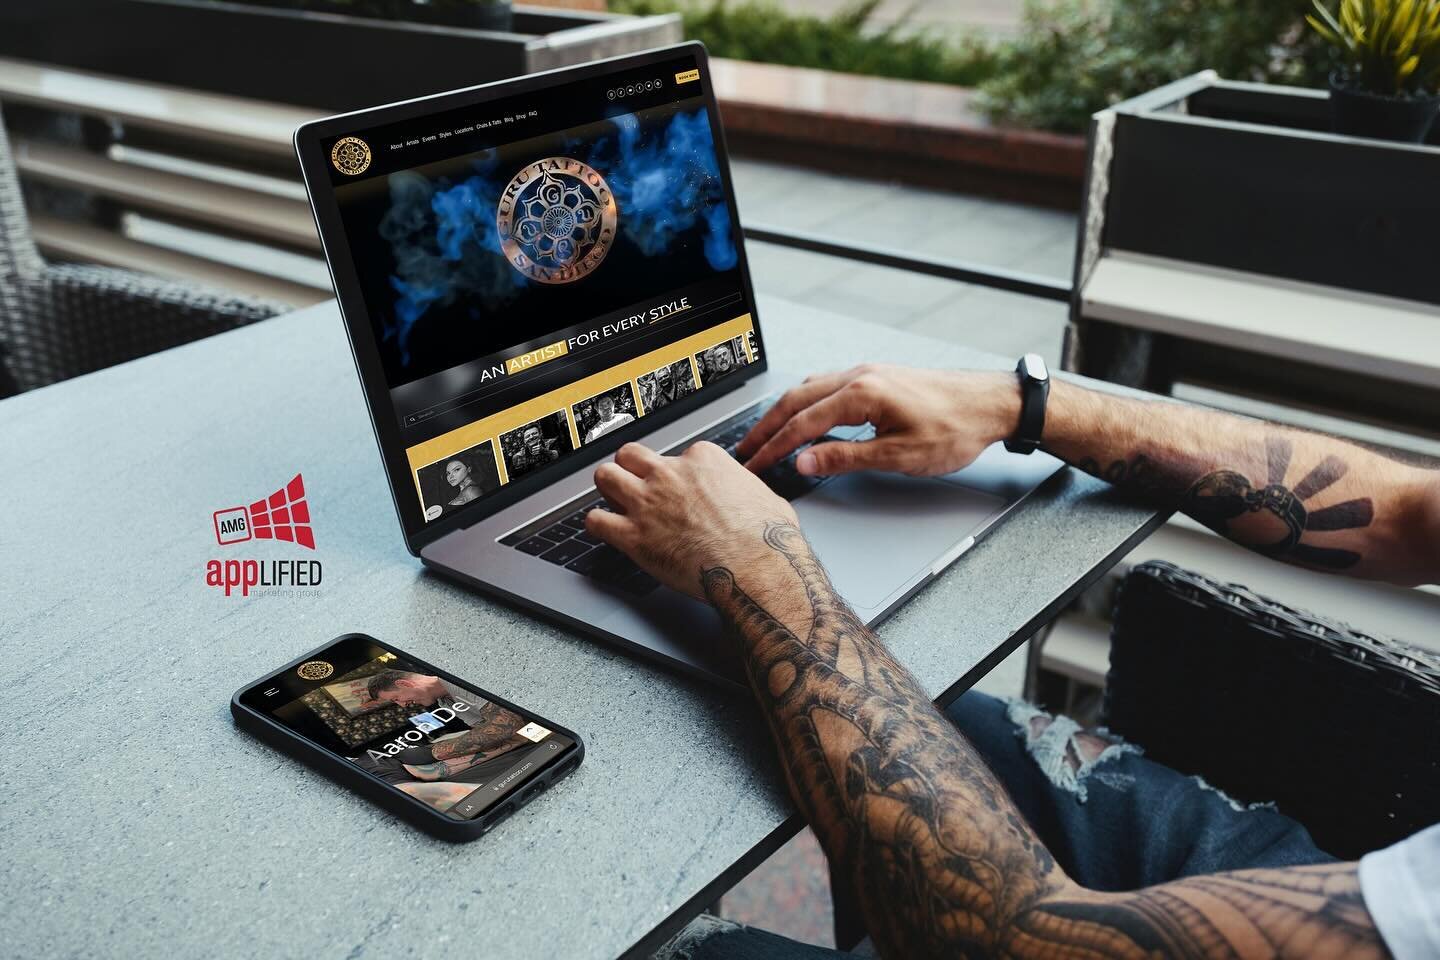 NEW! Guru Tattoo @gurutattoo got a brand new website design by @applifiedmarketinggroup in 2023! One of the best tattoo artists in the country @aarondellavedova and his amazing team have been incredible to work with as we reinvent their visual online